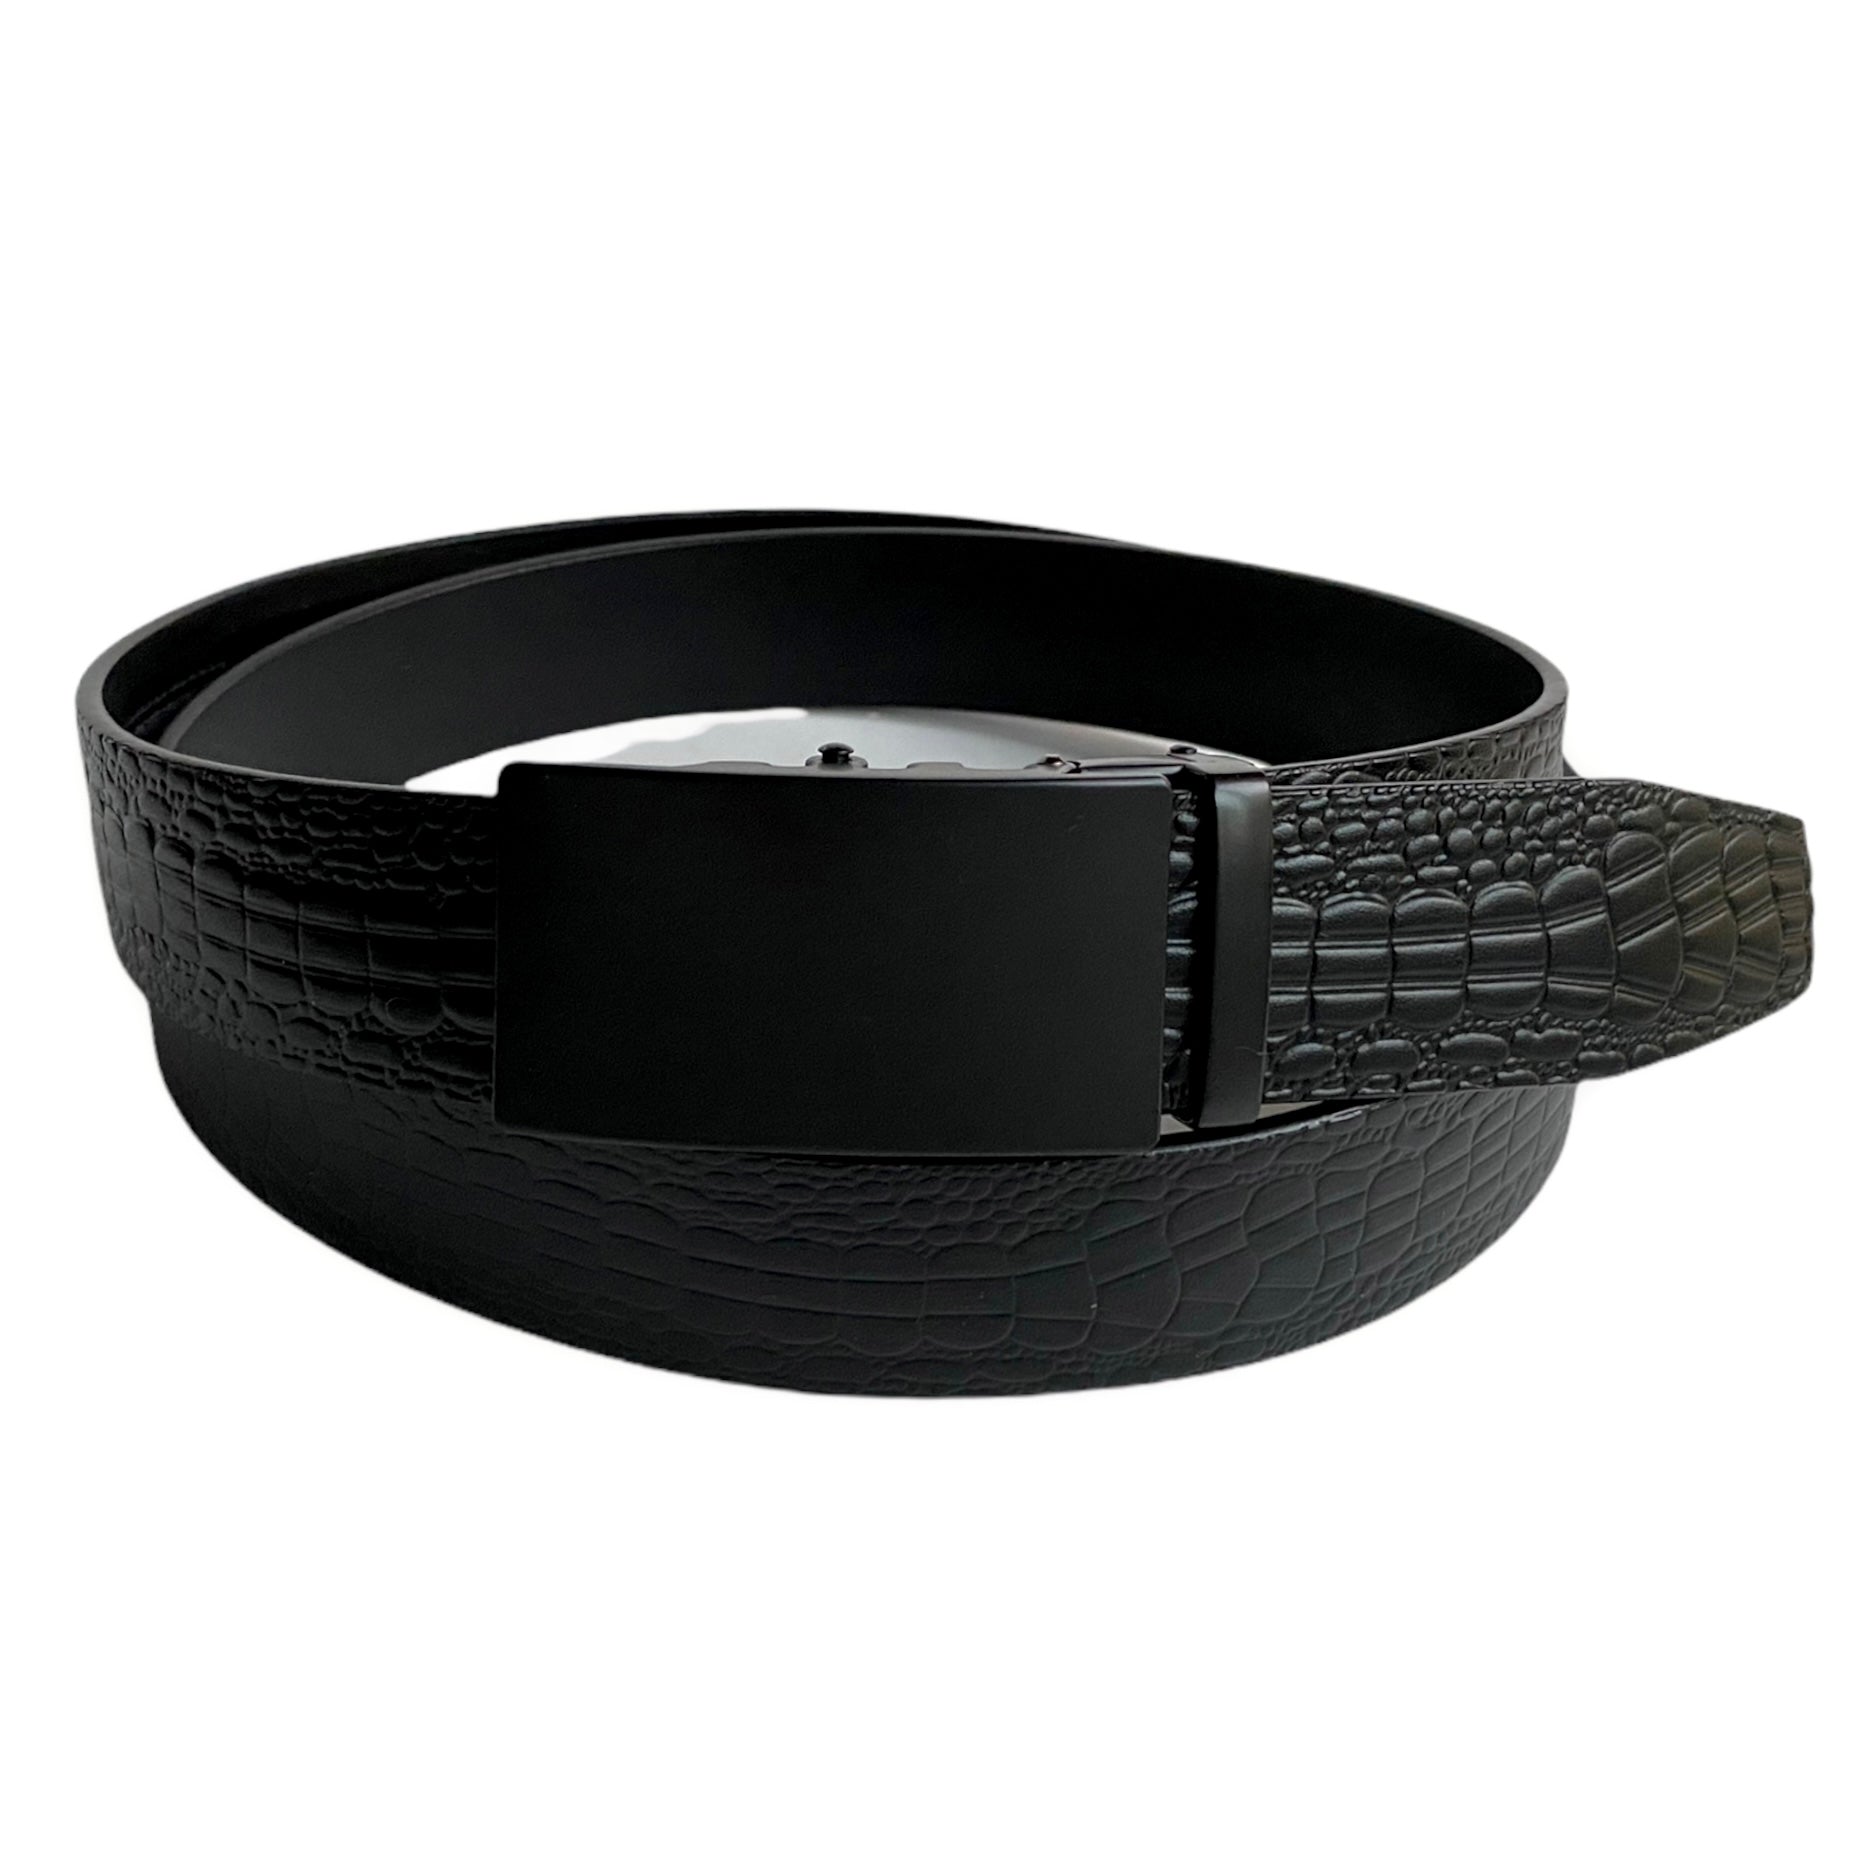 1.38" Genuine Leather Black Textured Strap And 1.38" Automatic Belt Buckle Black 24710792085655